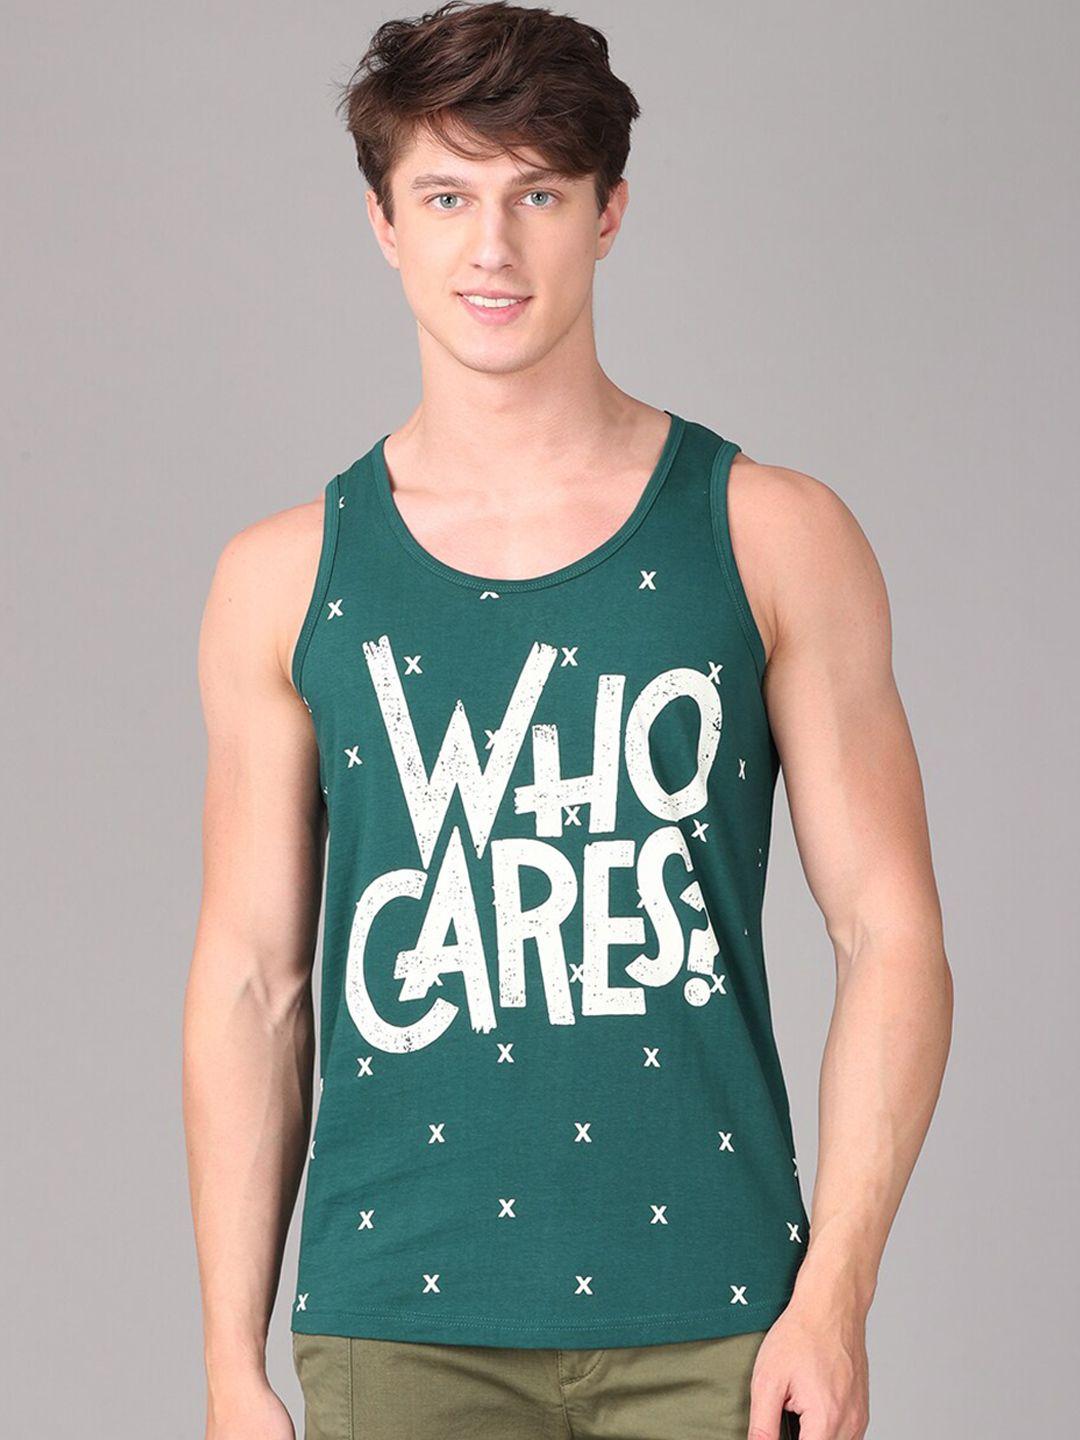 imyoung men green printed cotton slim-fit sleeveless t-shirt